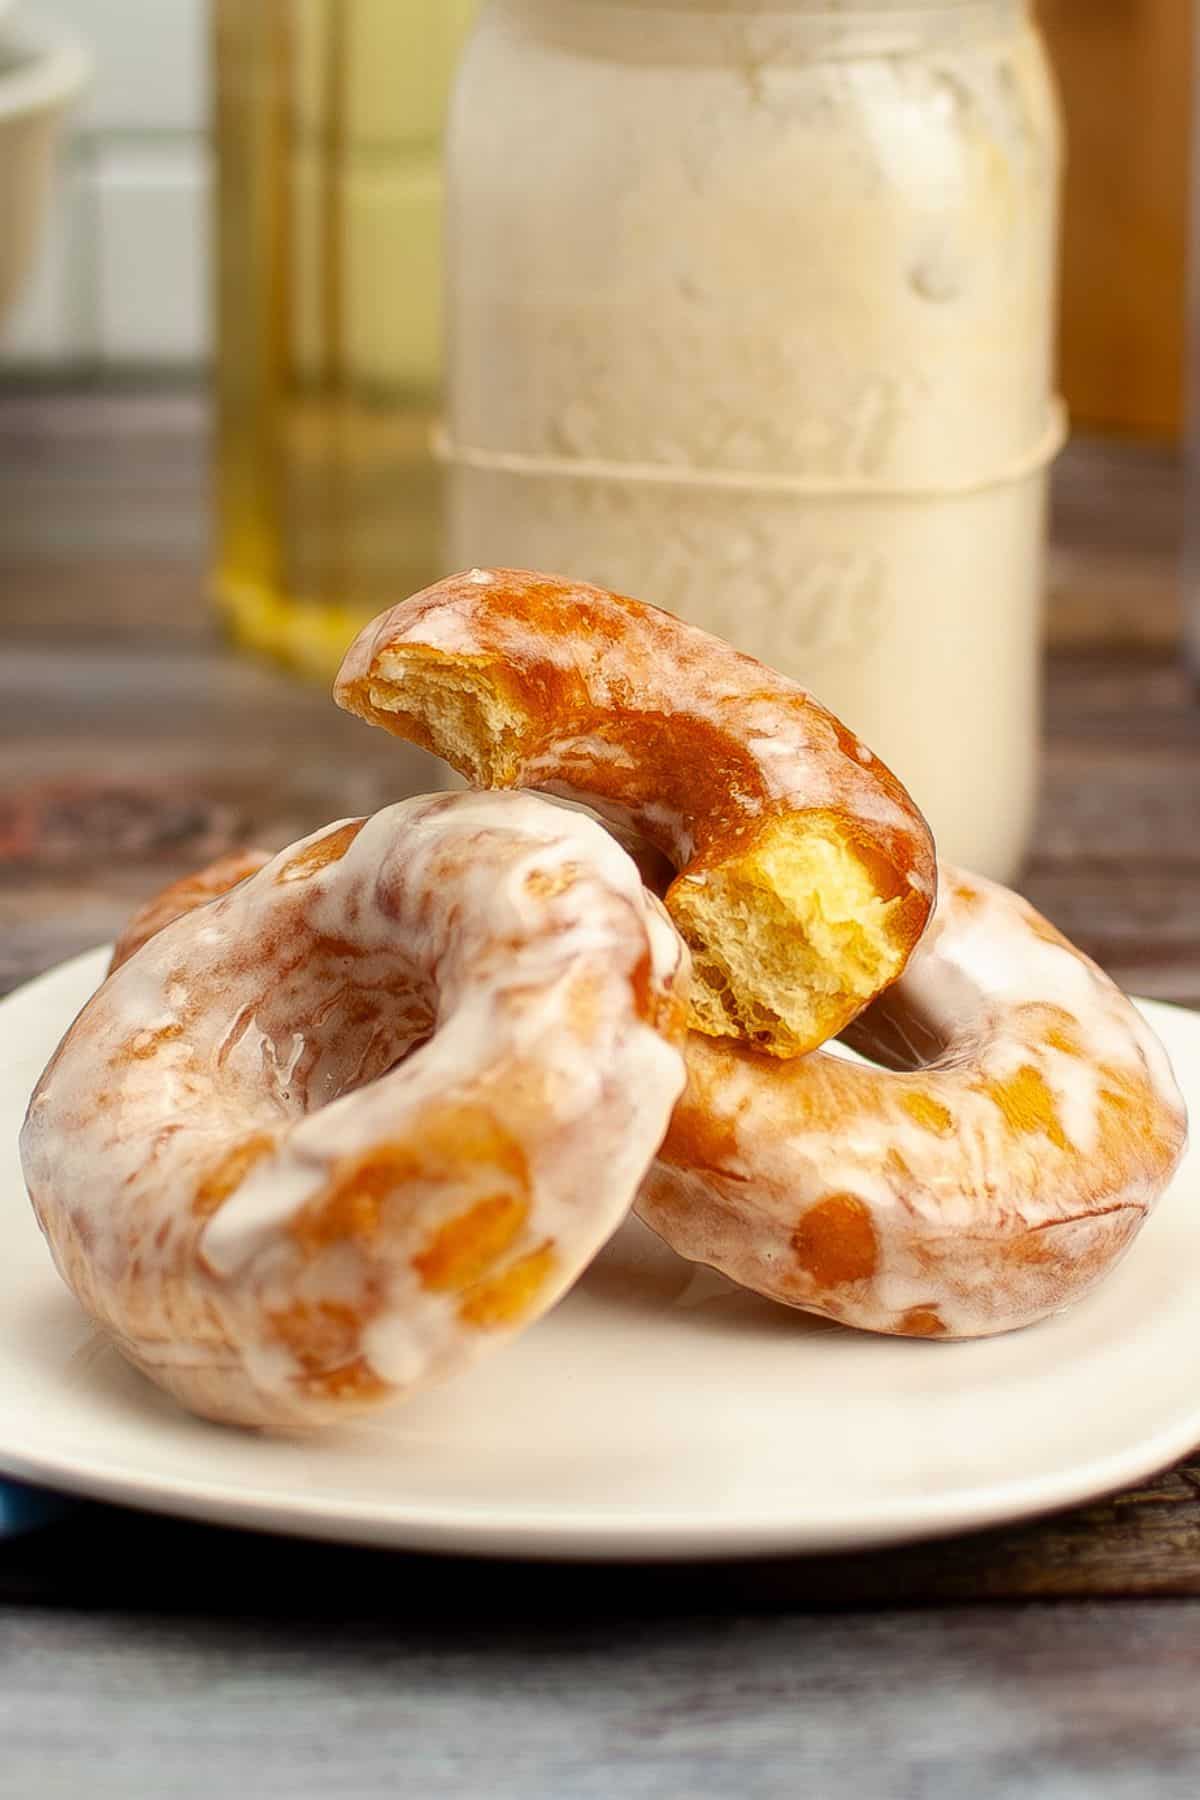 four glazed sourdough donuts stacked on a plate with the top one broken in half.